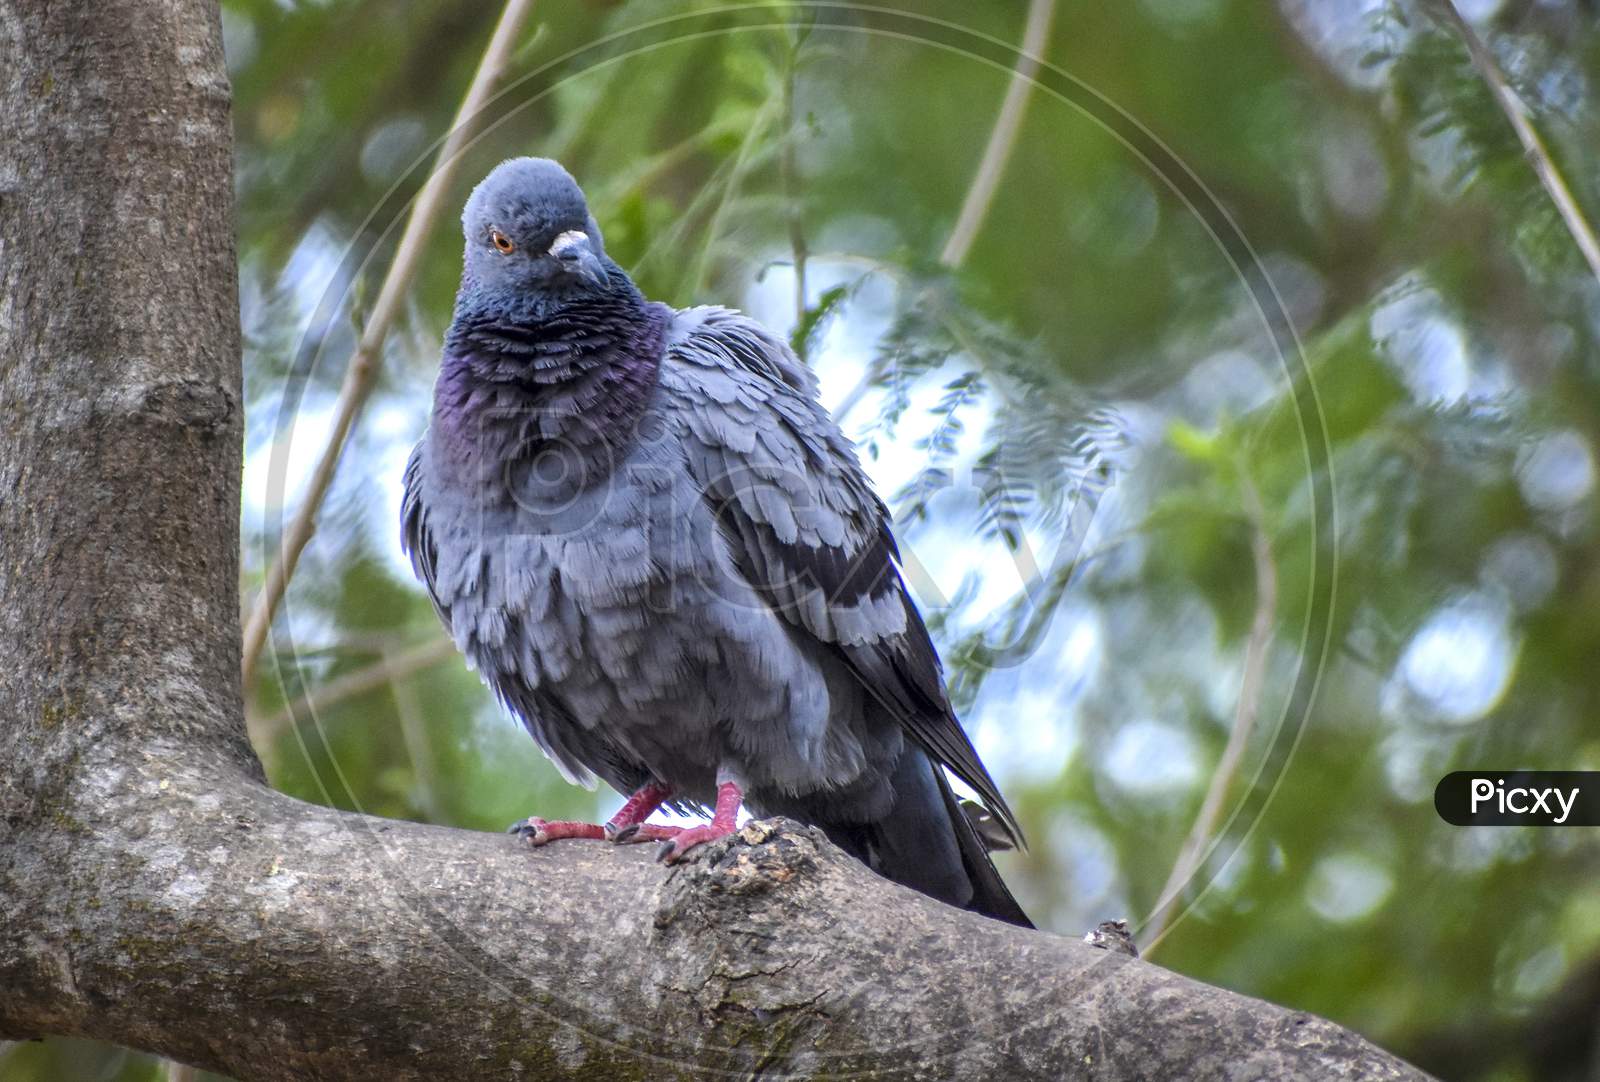 Homing Pigeon (Columba Livia Domestica) Derived From The Rock Pigeon, Selectively Bred For Its Ability To Find Its Way Home Over Extremely Long Distances.